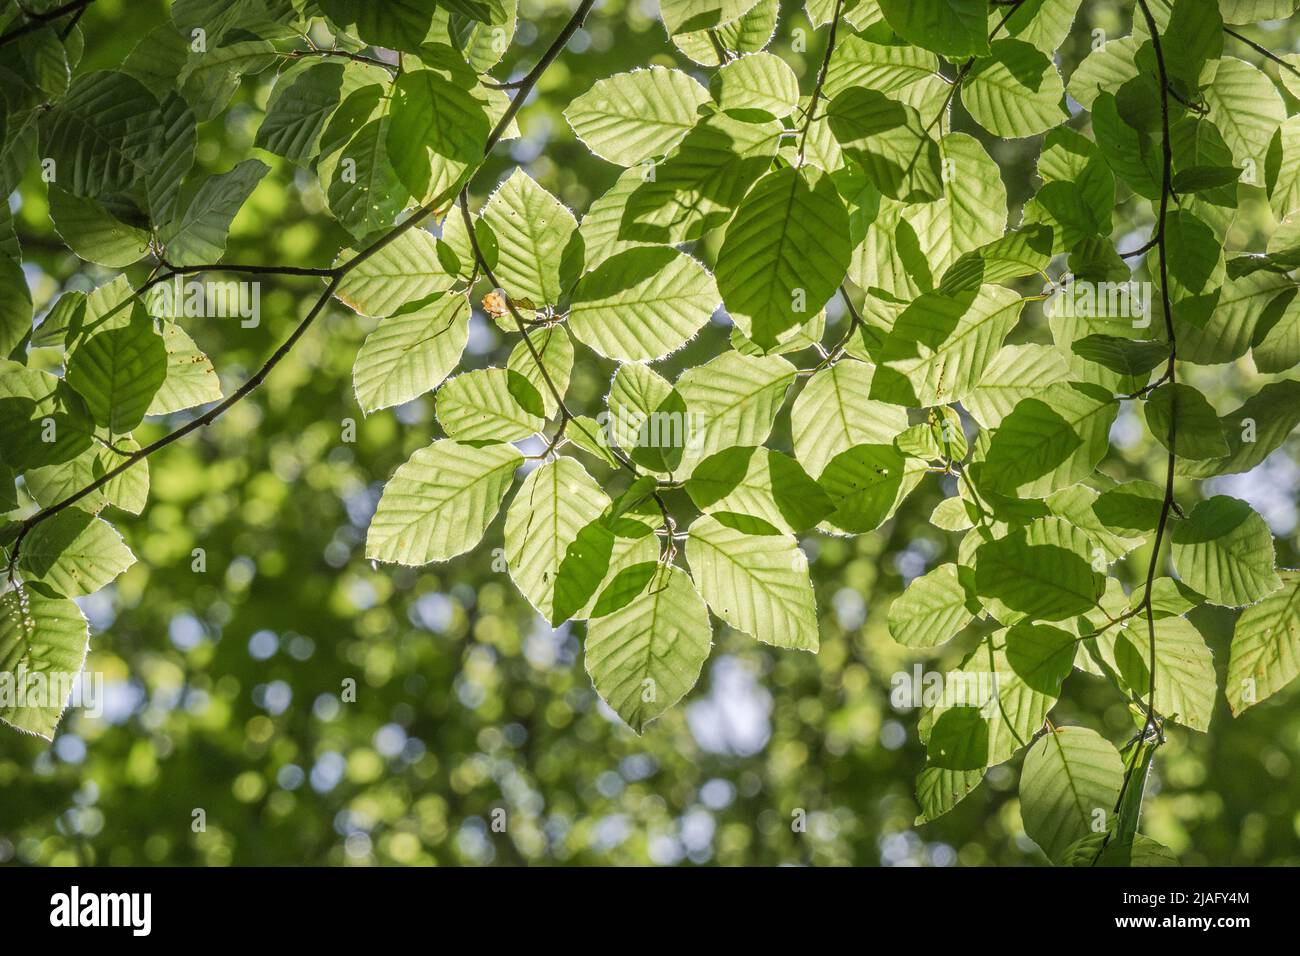 Mass of Beech / Fagus sylvatica leaves in sunlit tree canopy. Bbeech wood used for furniture making. Young leaves edible, & plant used medicinally. Stock Photo